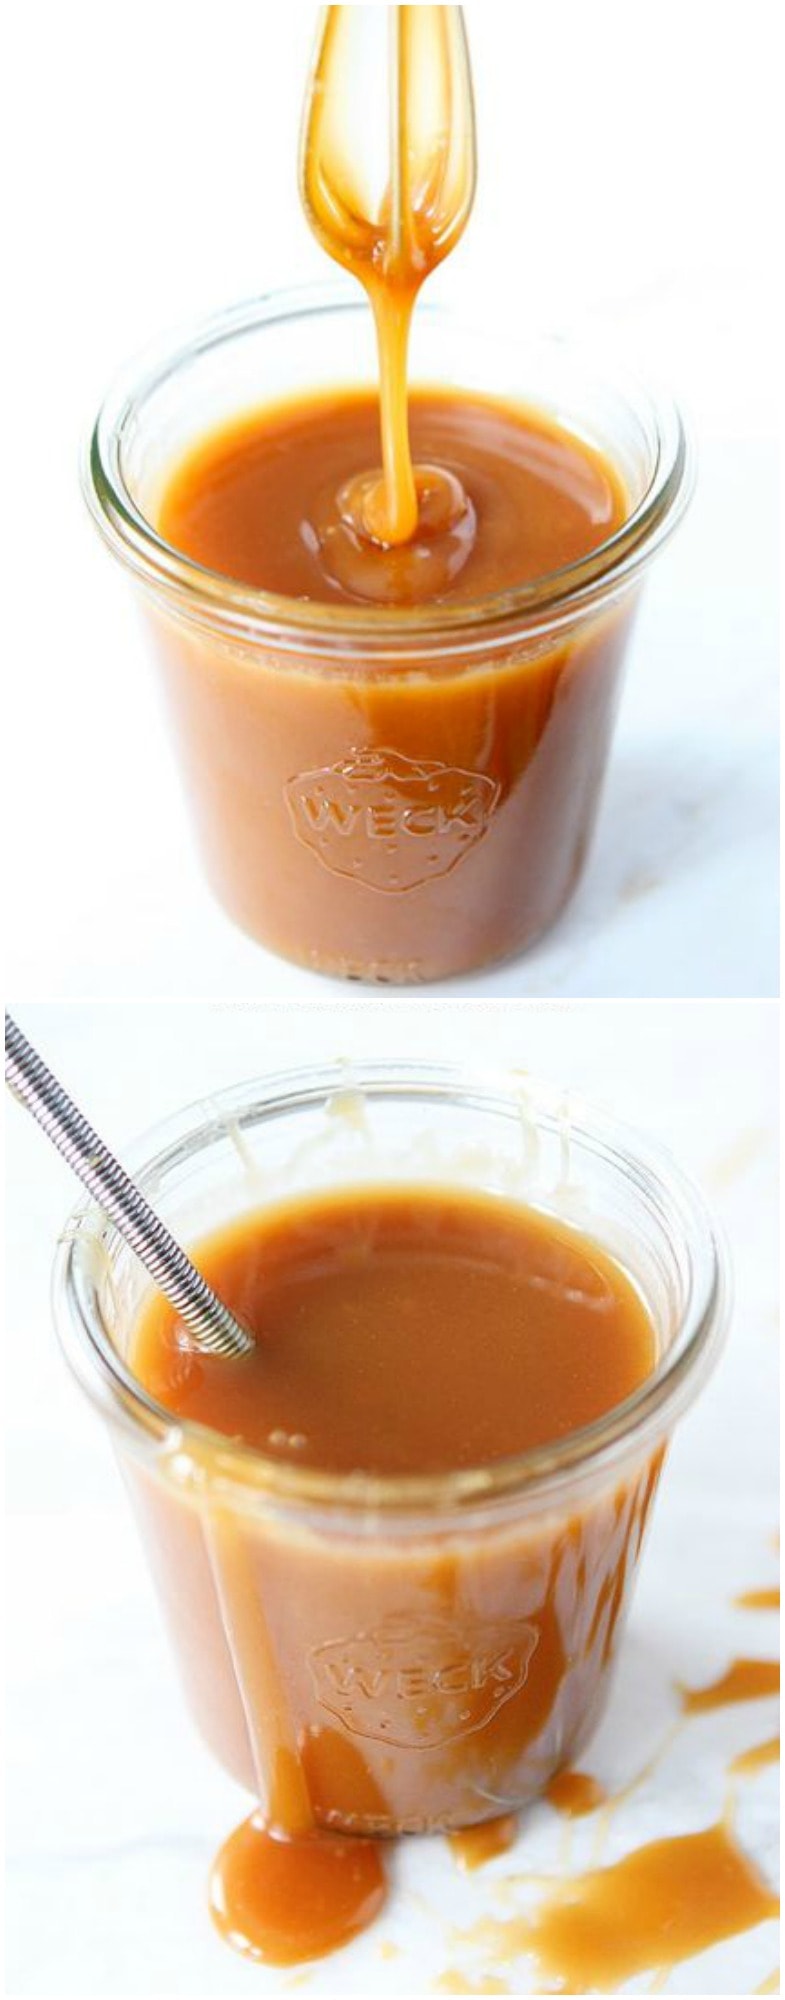 Salted Caramel Sauce Recipe on twopeasandtheirpod.com The BEST salted caramel sauce! It's easy to make too!